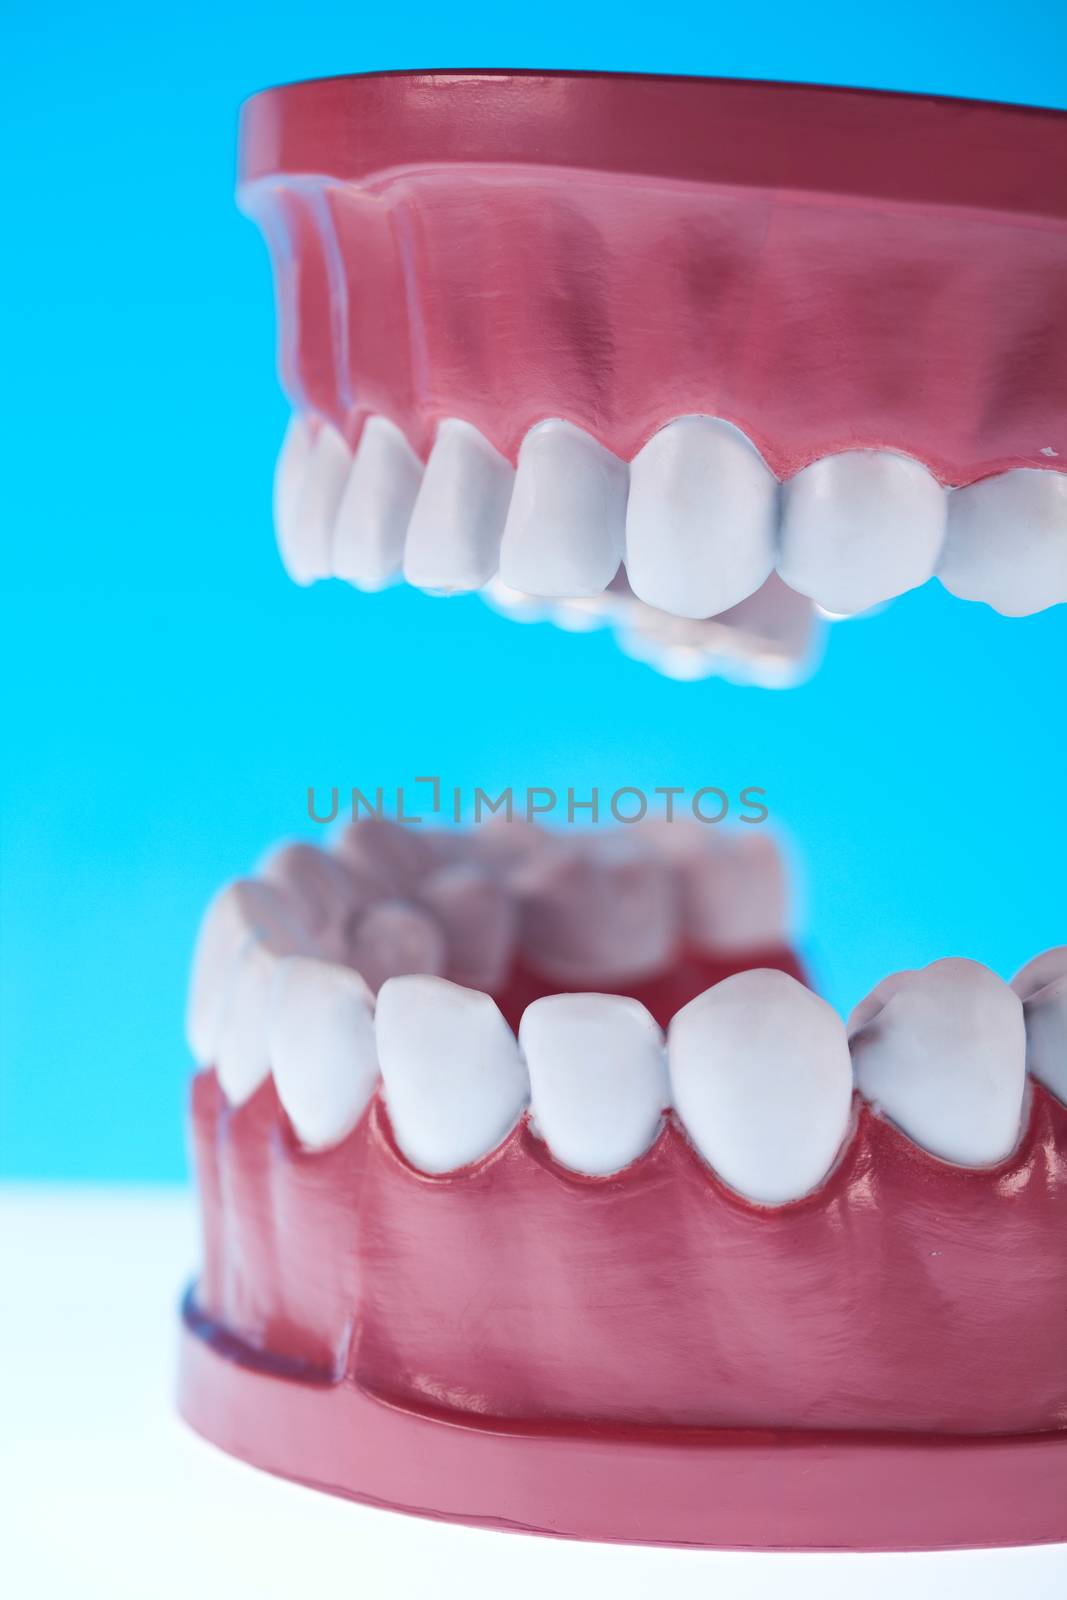 Anatomy of the tooth, bright colorful tone concept by JanPietruszka